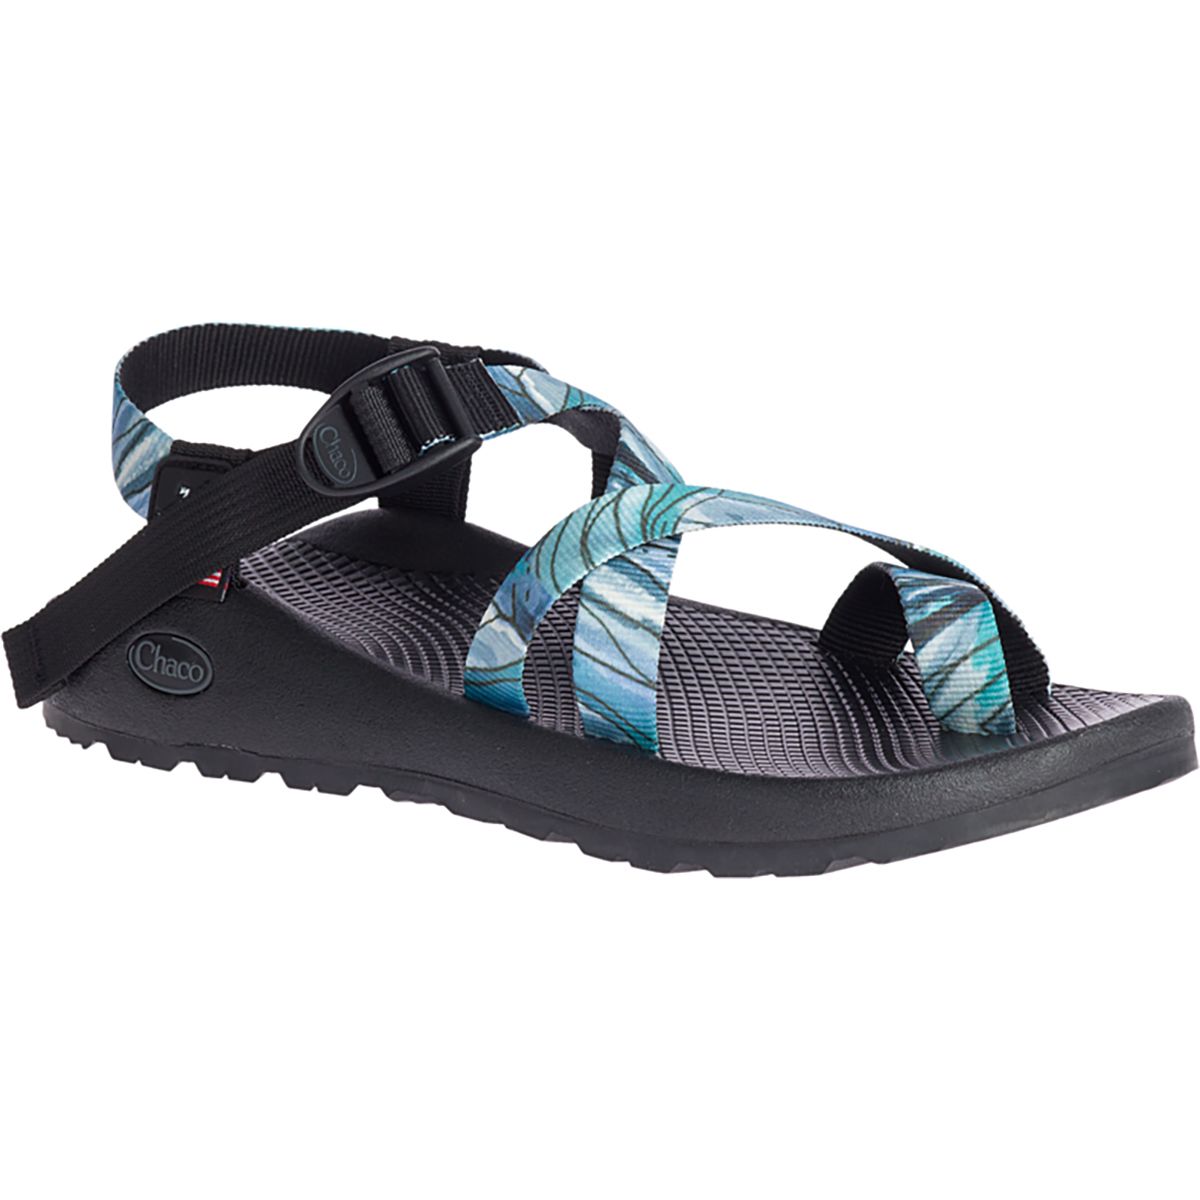 Chaco Z/2 Classic Sarah Uhl Artist Collection Sandal - Men's - Footwear